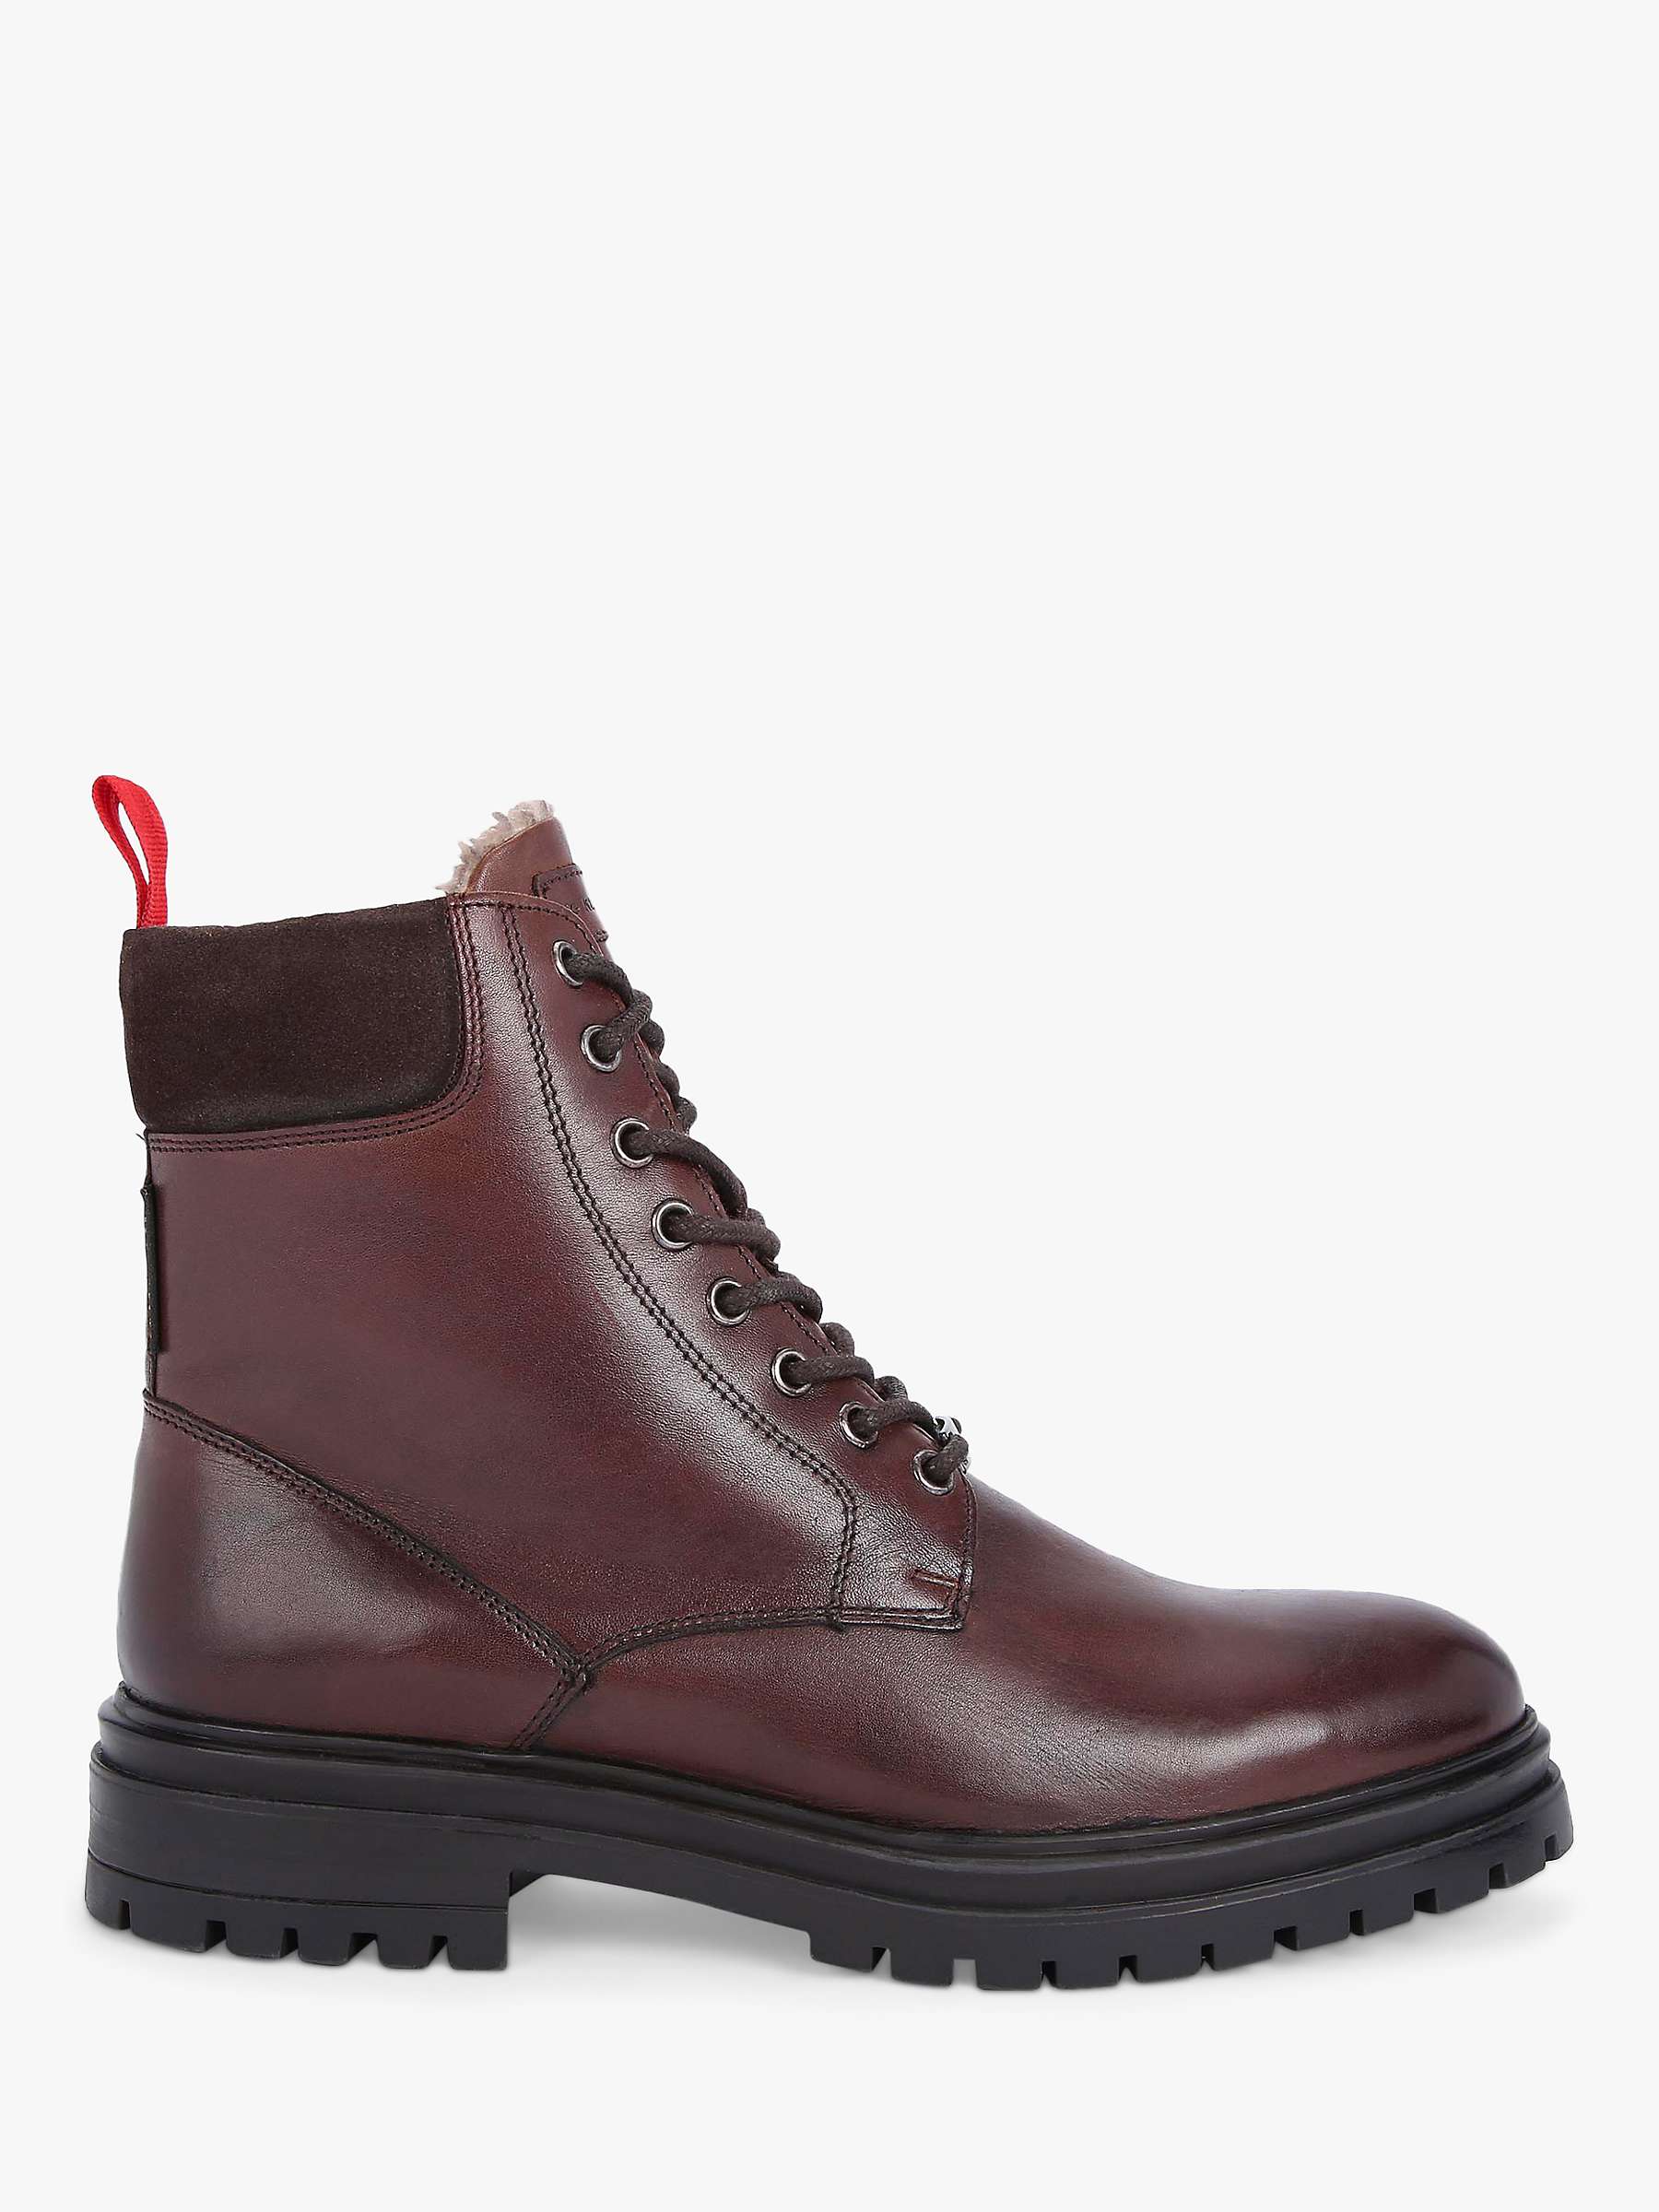 Buy KG Kurt Geiger Force Cuff Leather Ankle Boots, Brown Online at johnlewis.com